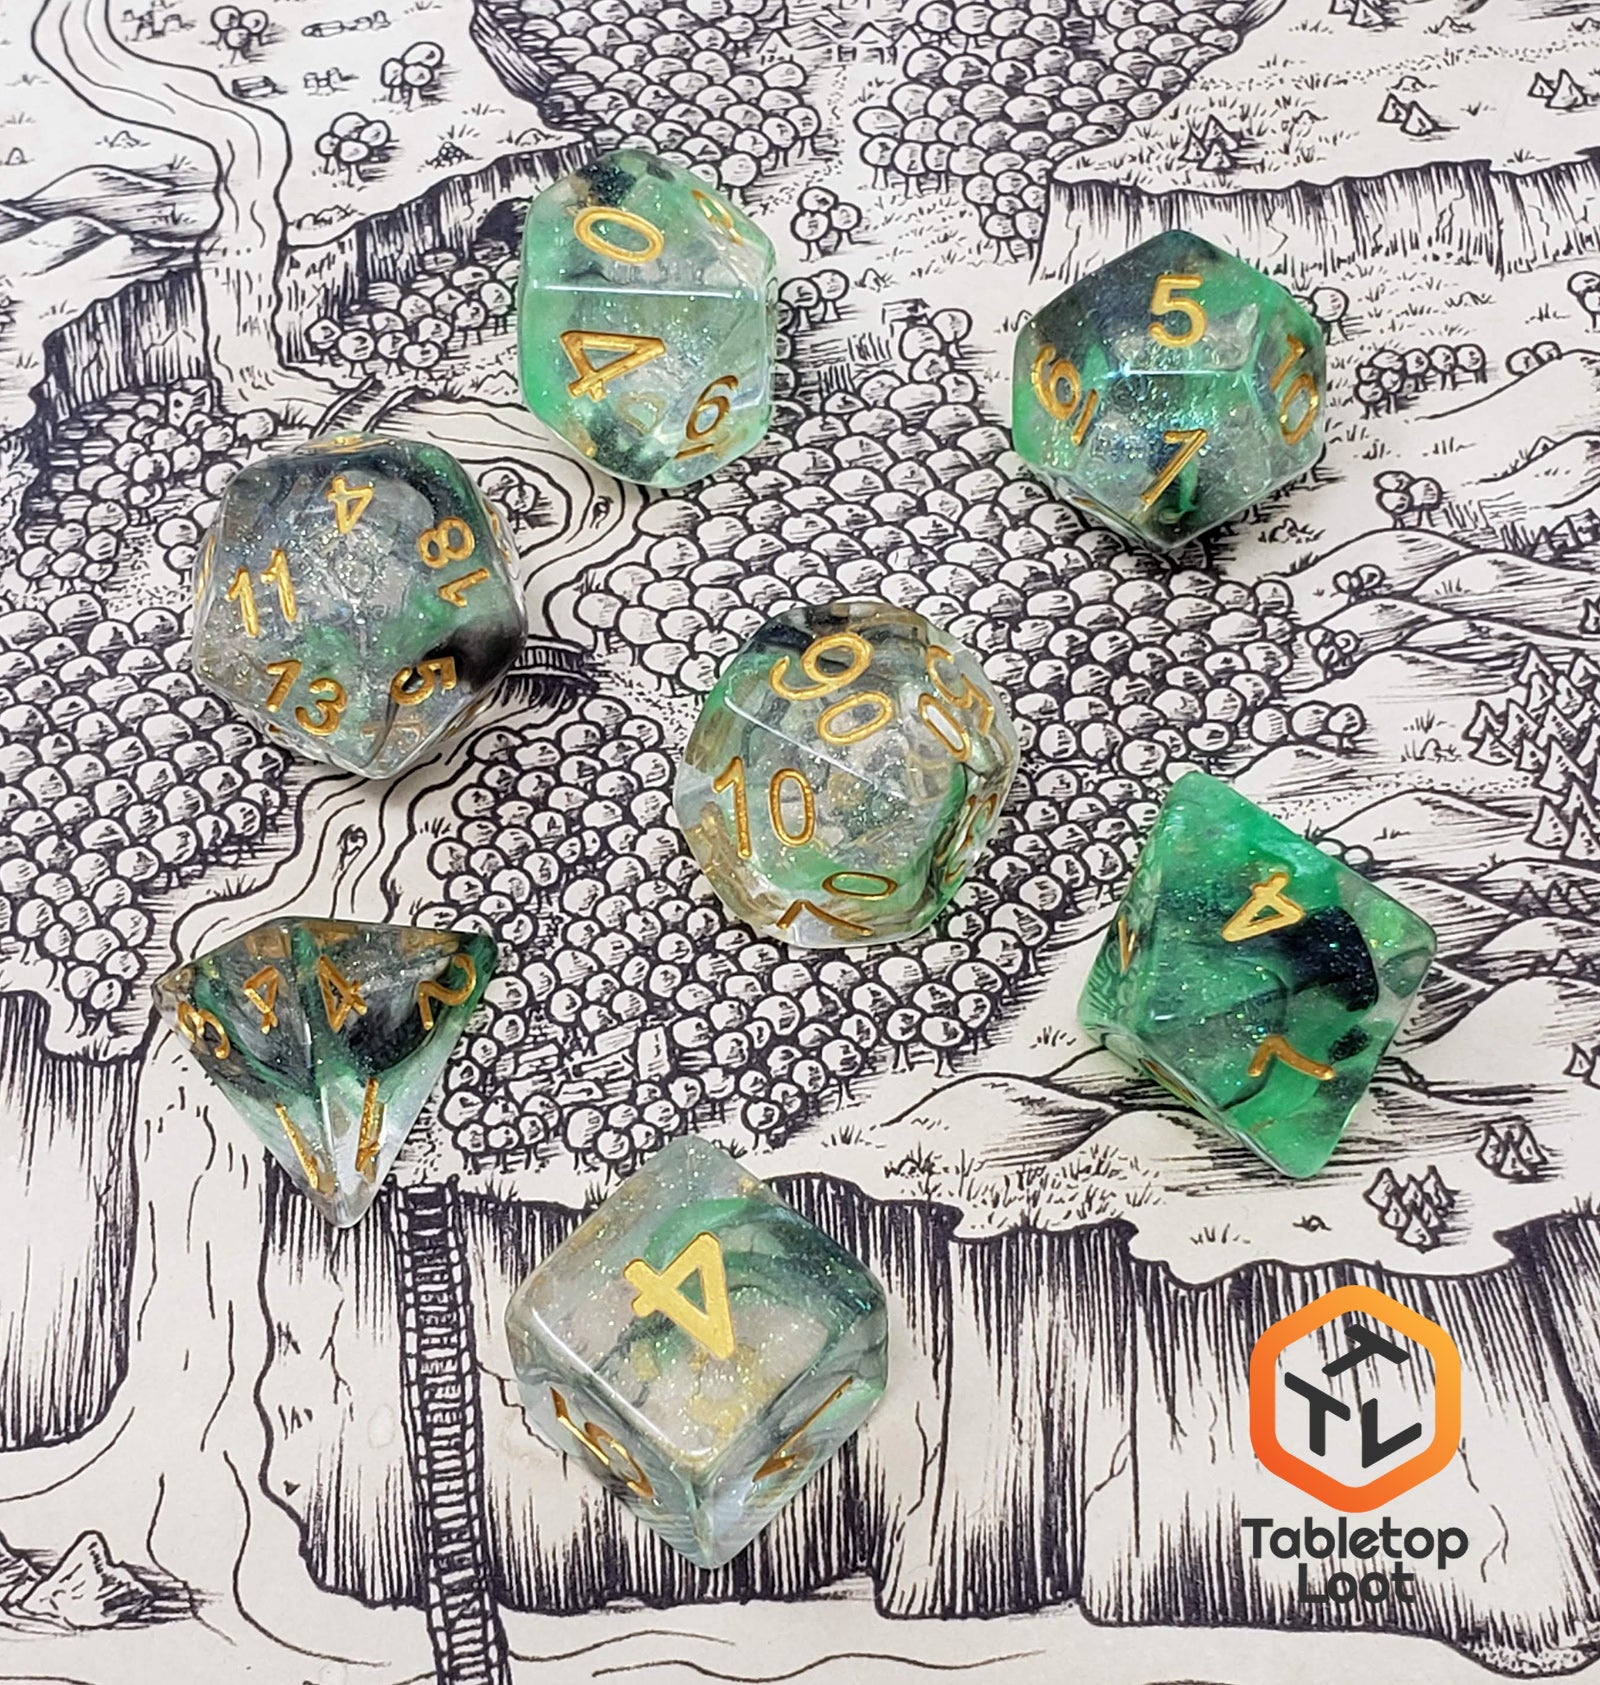 The Luminous Venom 7 piece dice set from Tabletop Loot with green and black swirls in a clear glittery resin with gold numbering on a map by Deven Rue.